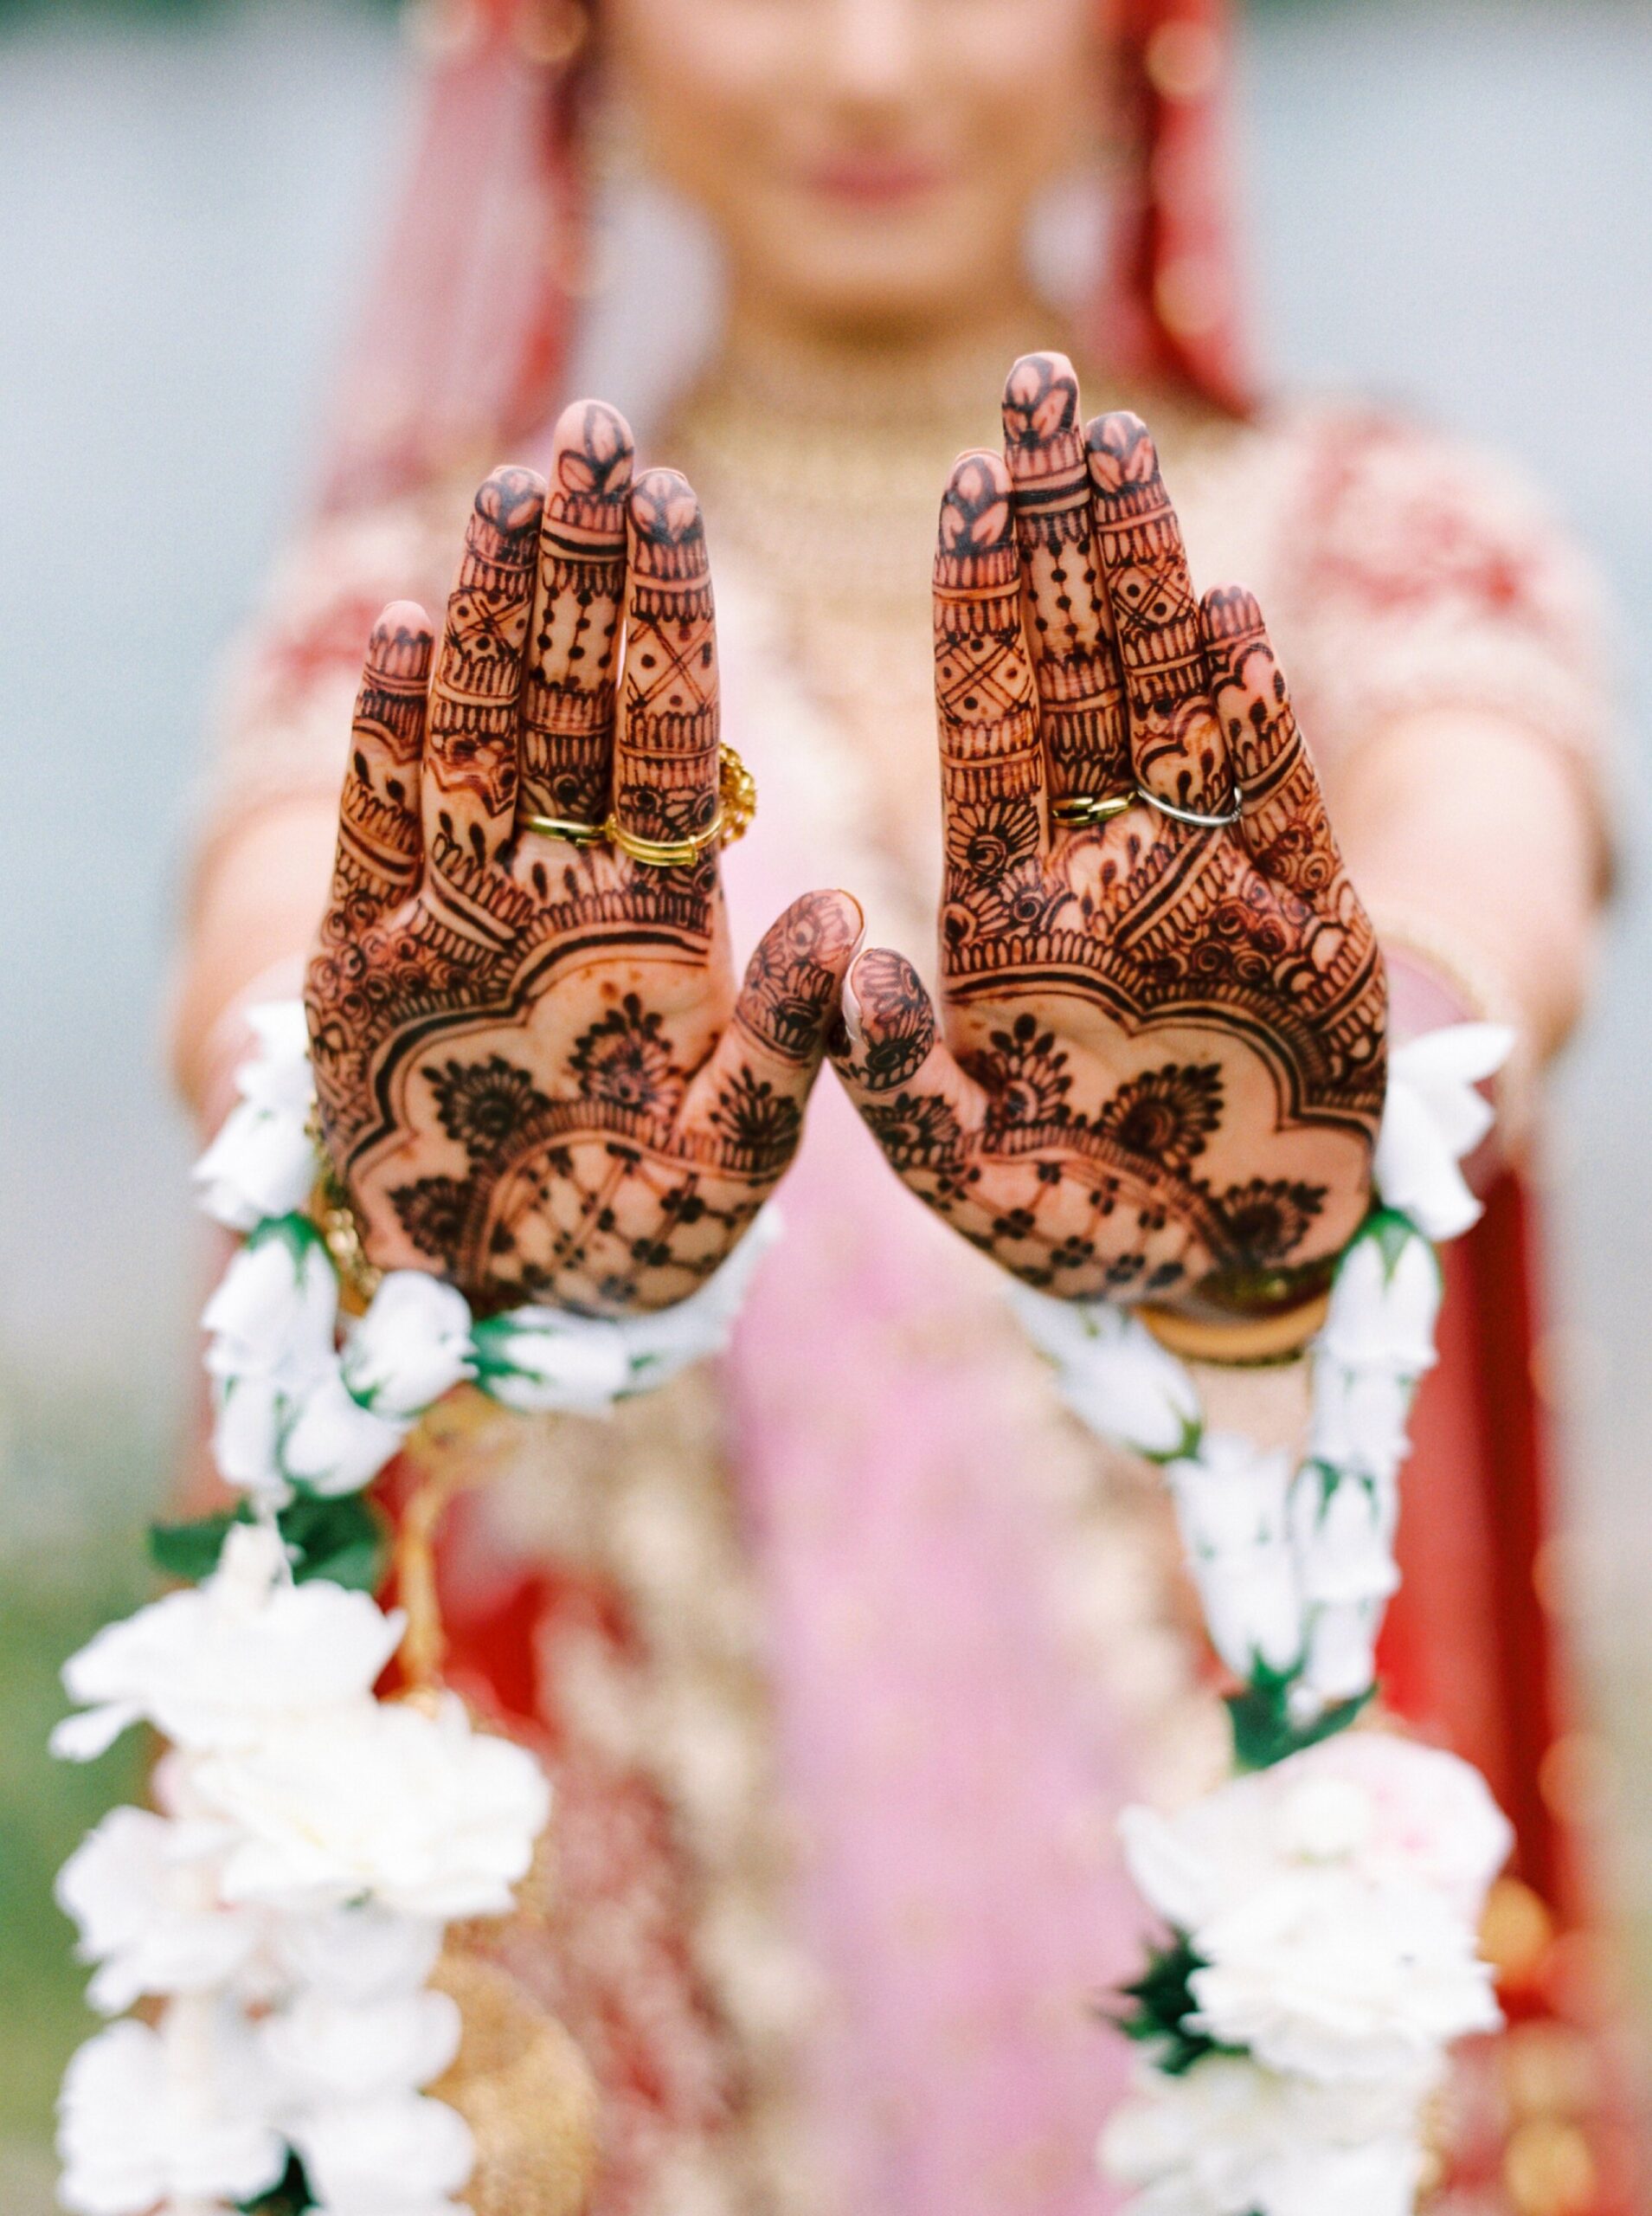 Sikh Temple wedding ceremony and portraits